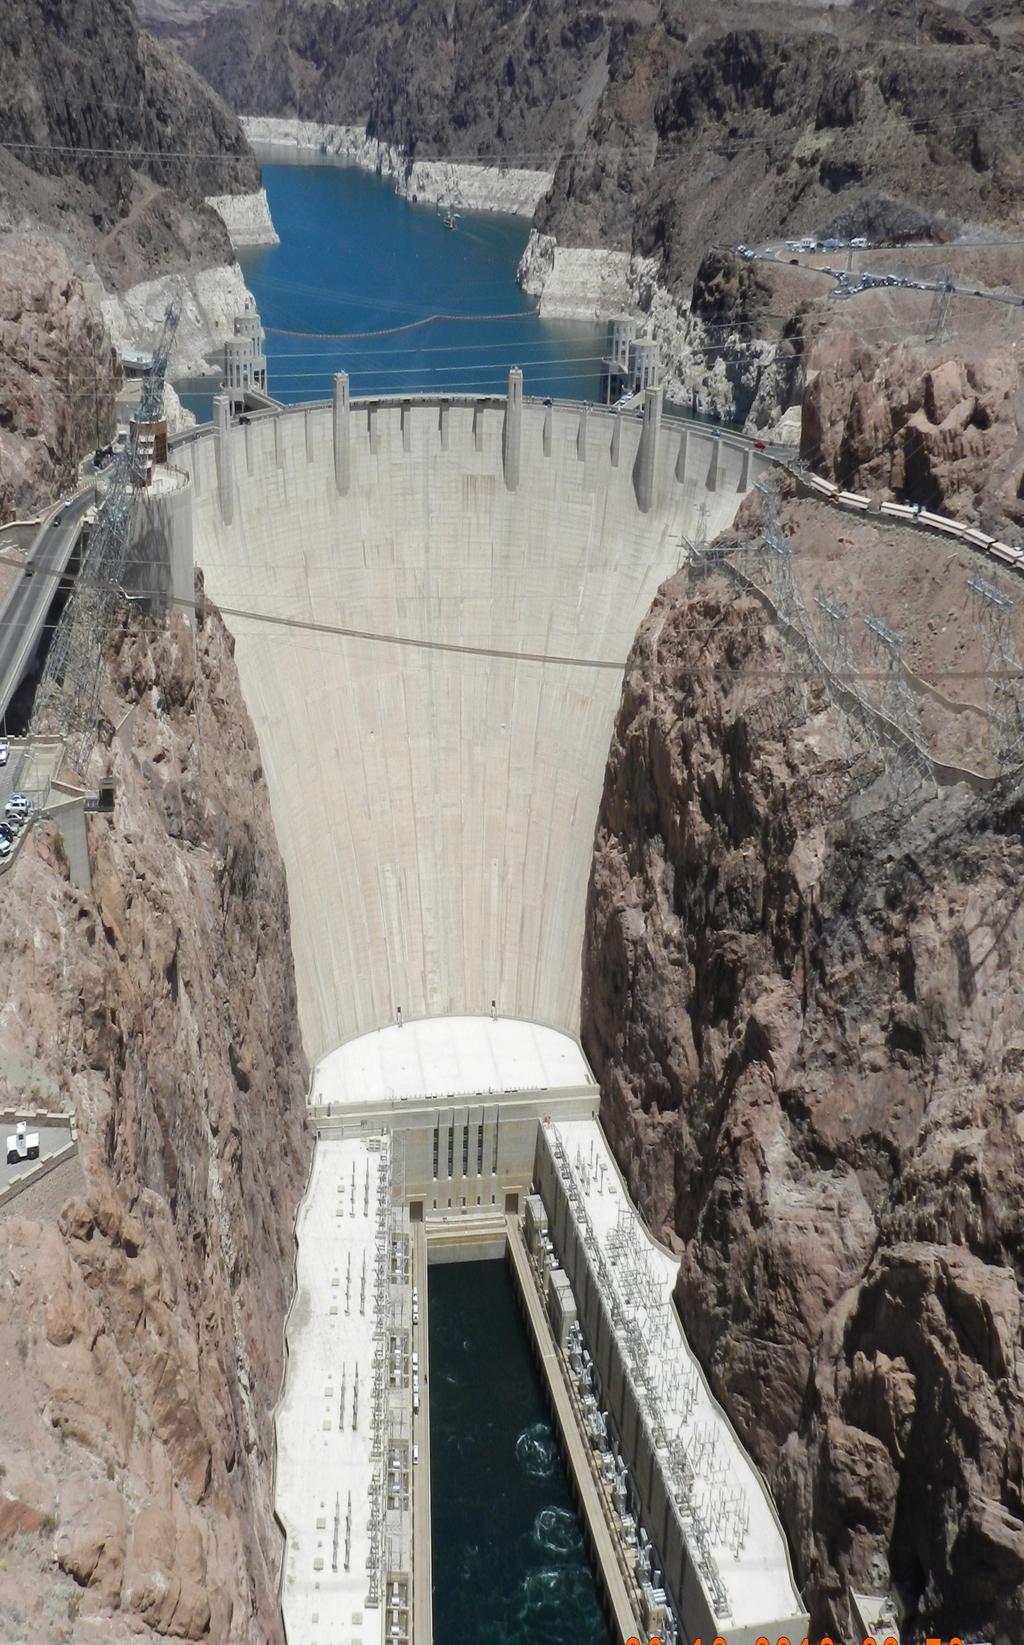 Spectacular view of Hoover Dam from the